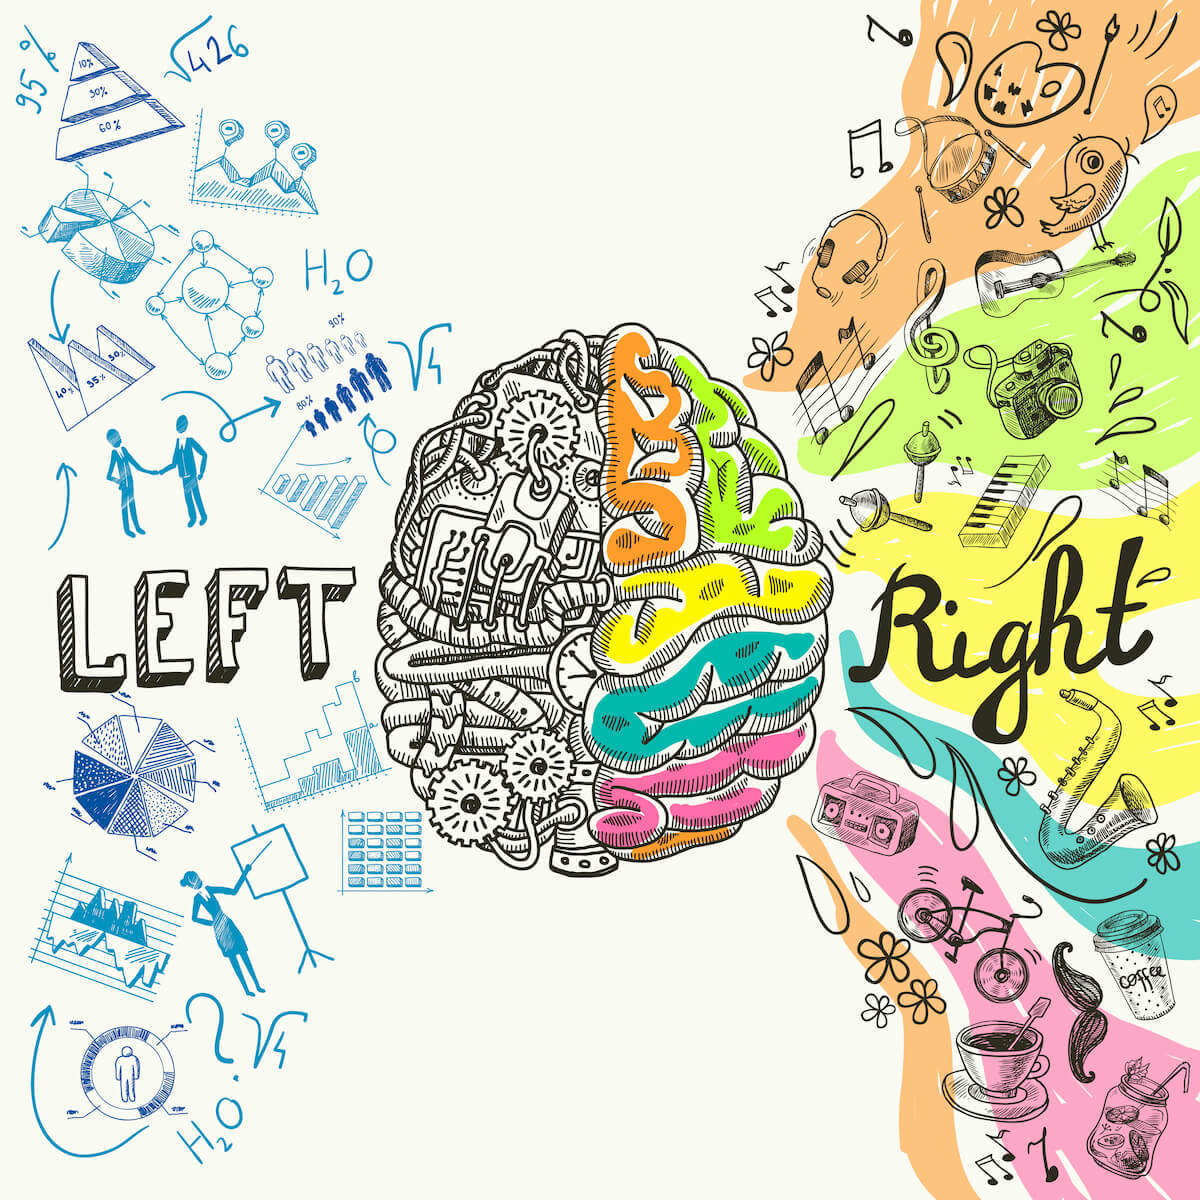 right and left brain differences that reveal how to get rid of anxiety: focus on right brain activities